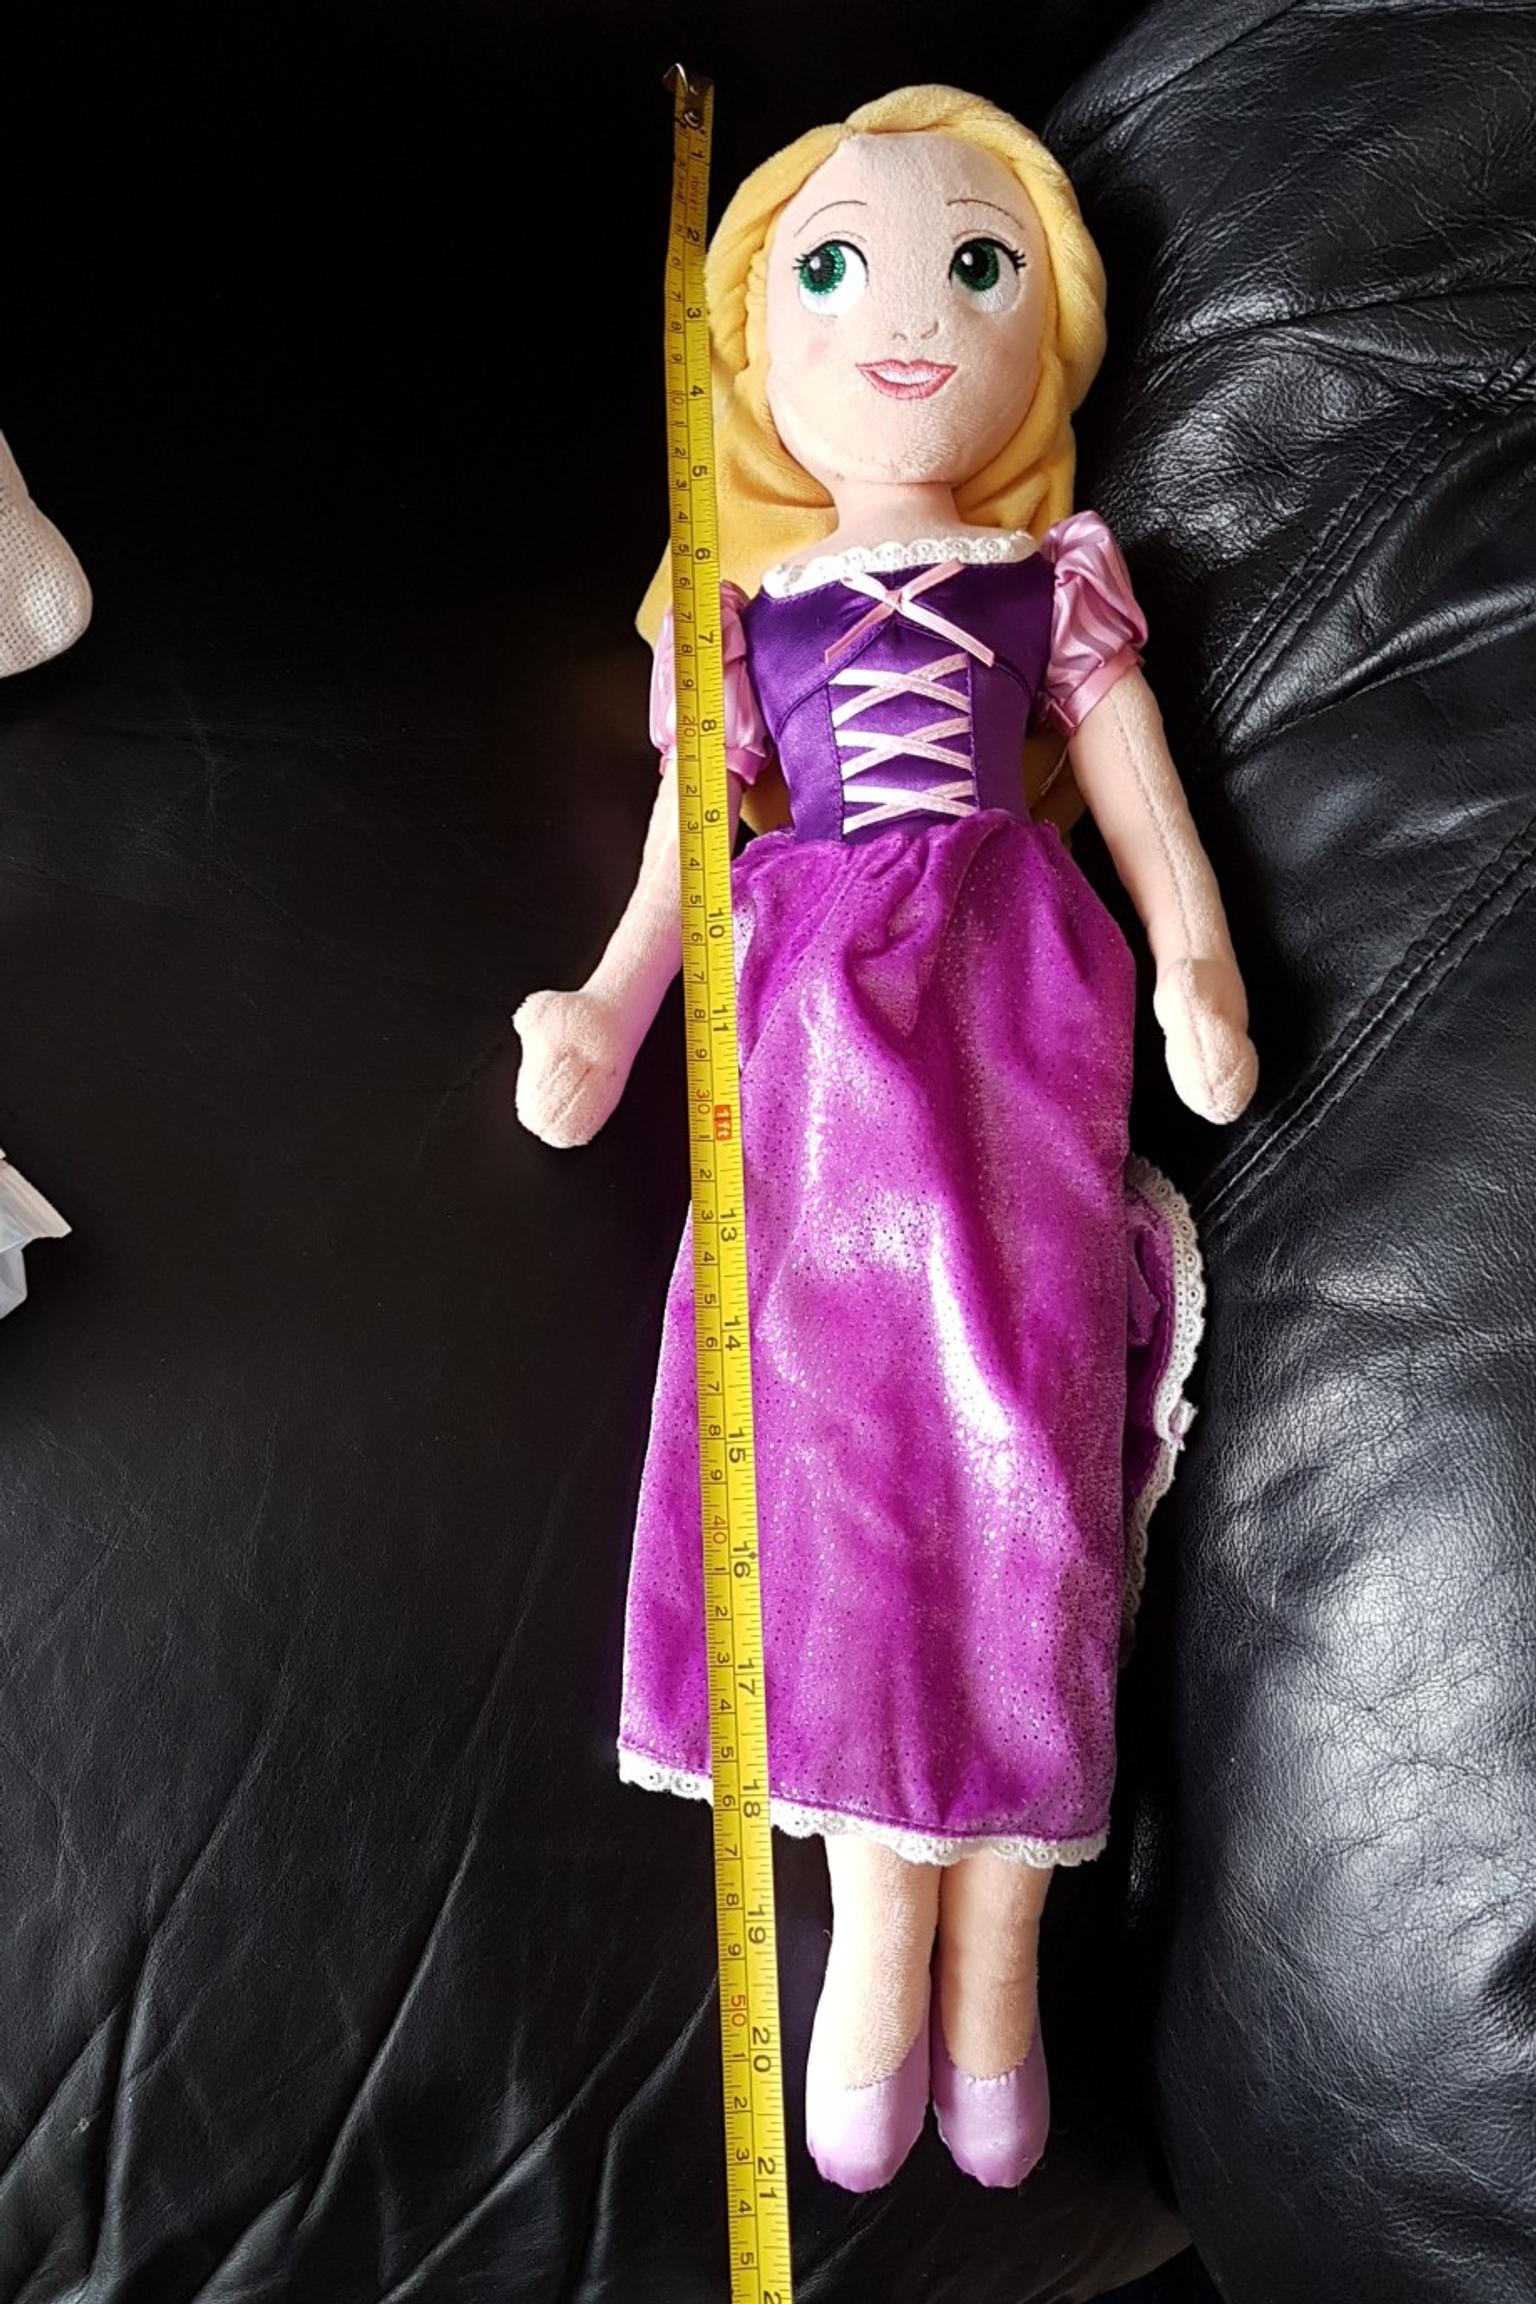 NEW OFFICIAL 8" DISNEY TANGLED RAPUNZEL PLUSH SOFT TOY 